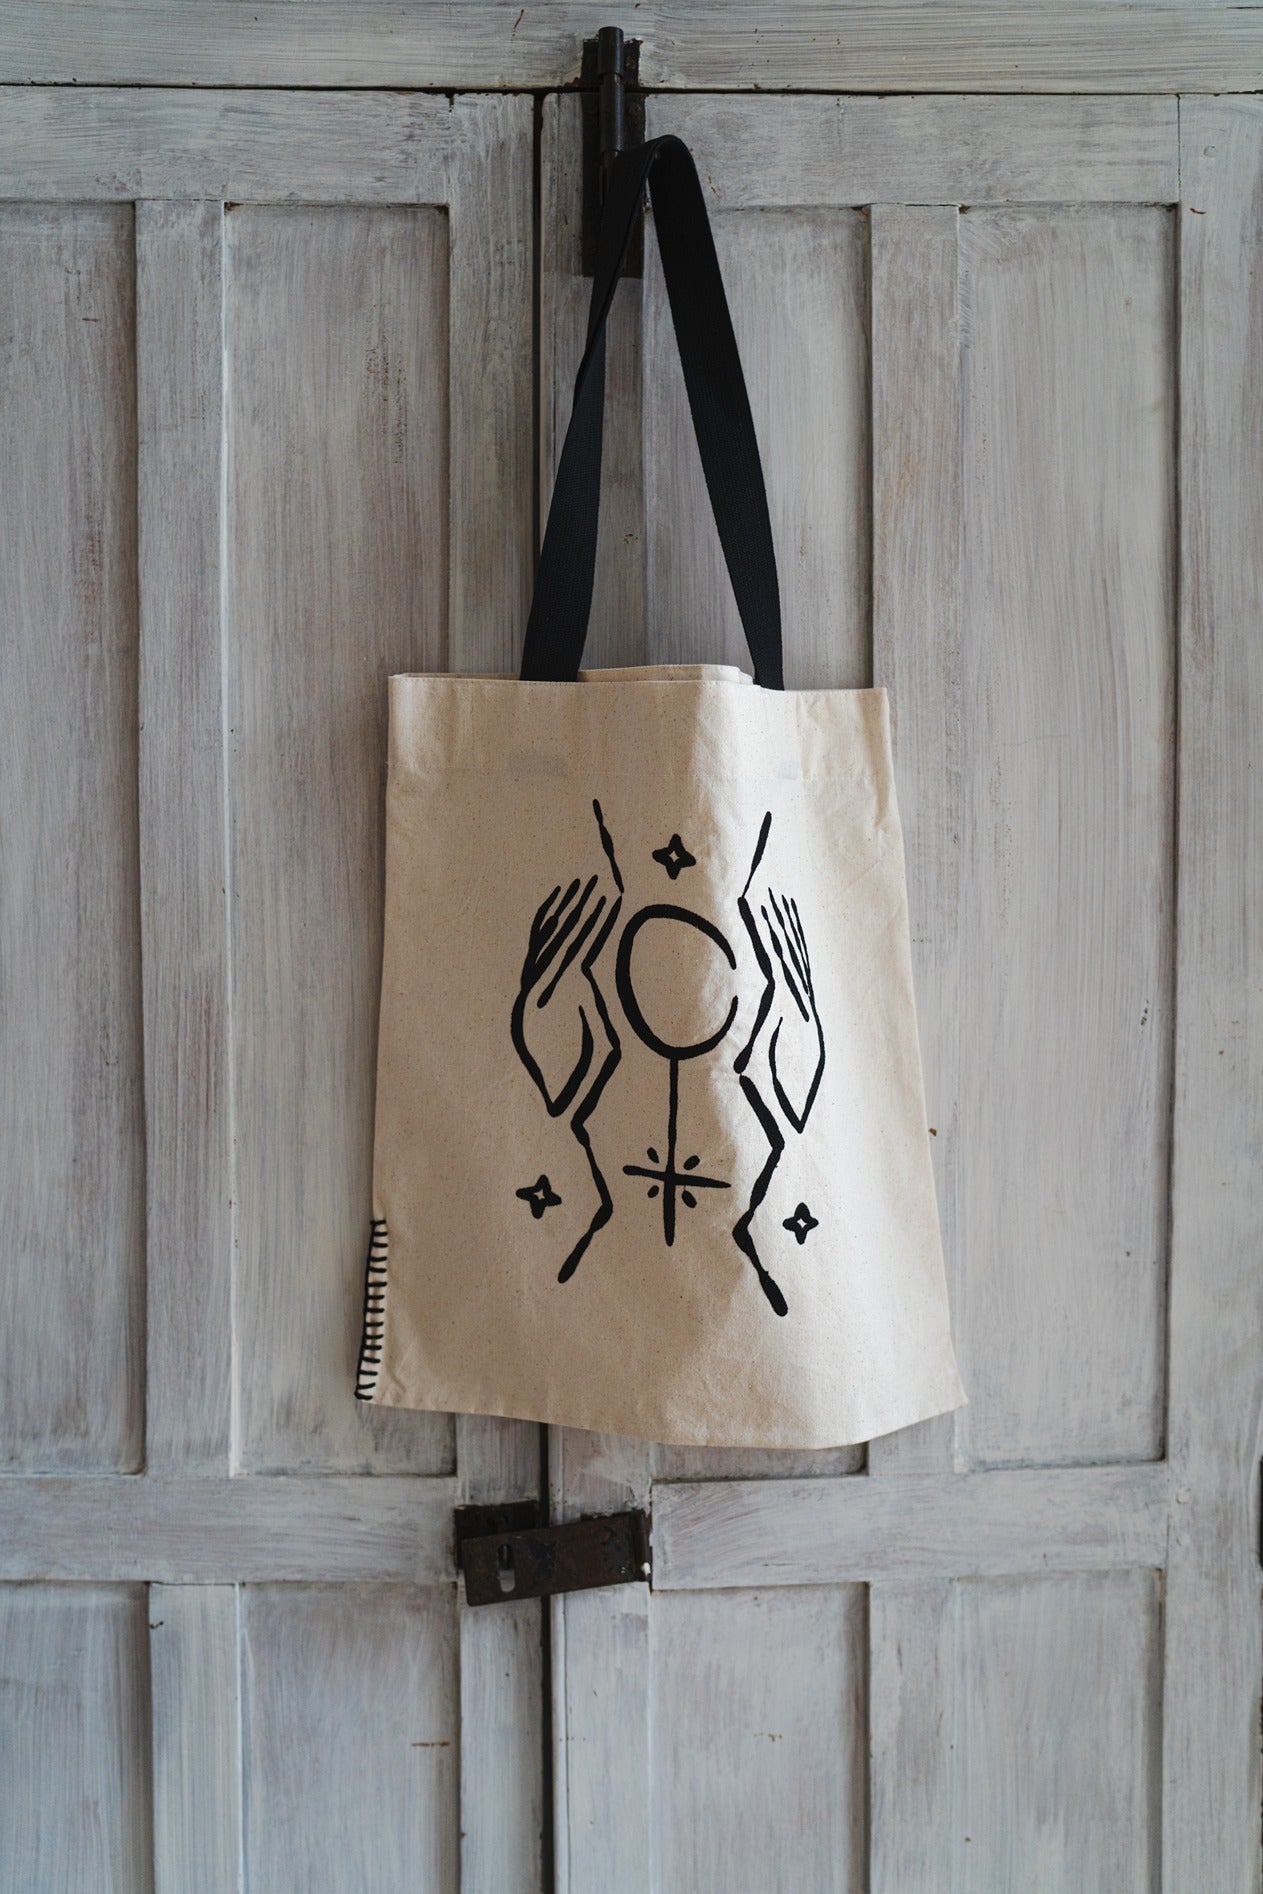 Eyes of the Heart - Tote bag